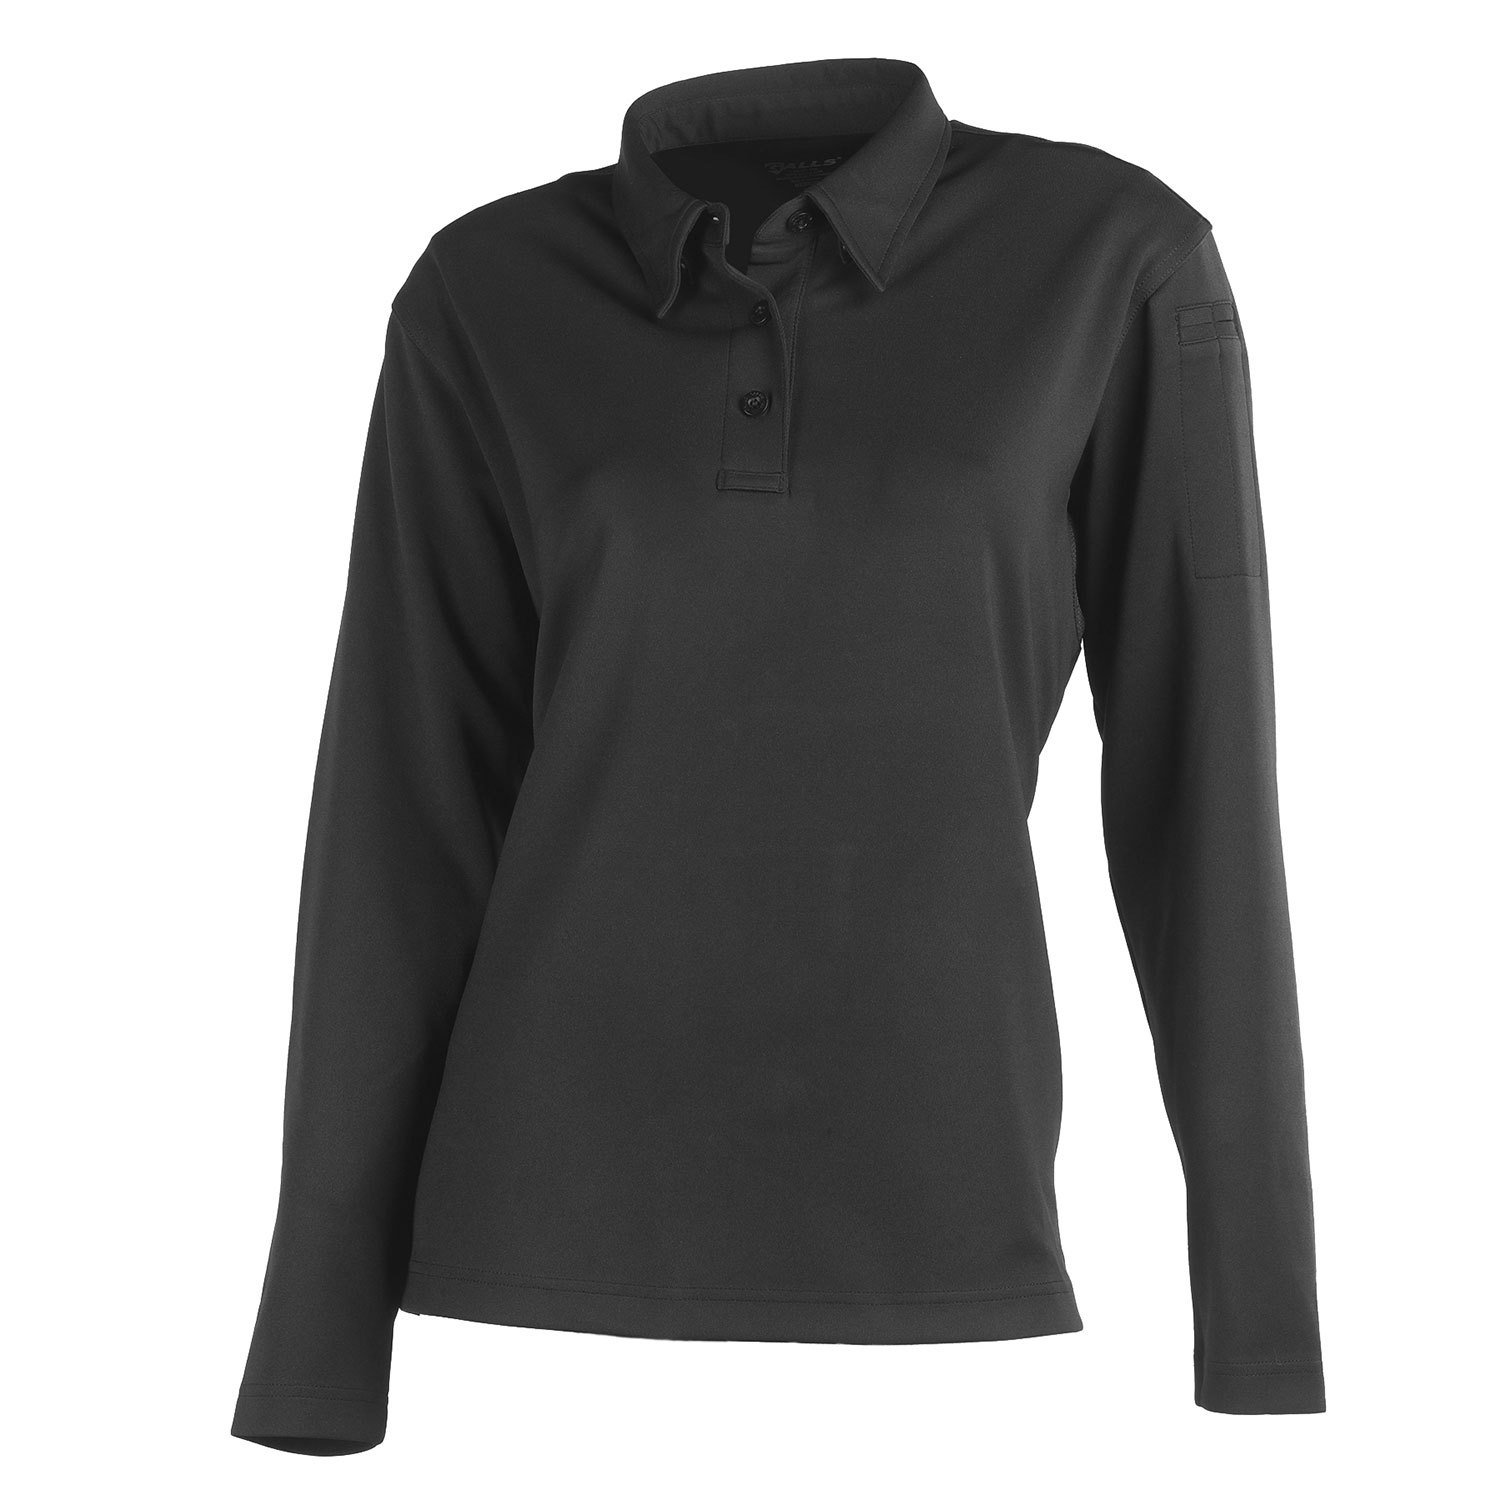 GALLS WOMENS LONG SLEEVE COOLBEST II PERFORMANCE POLO